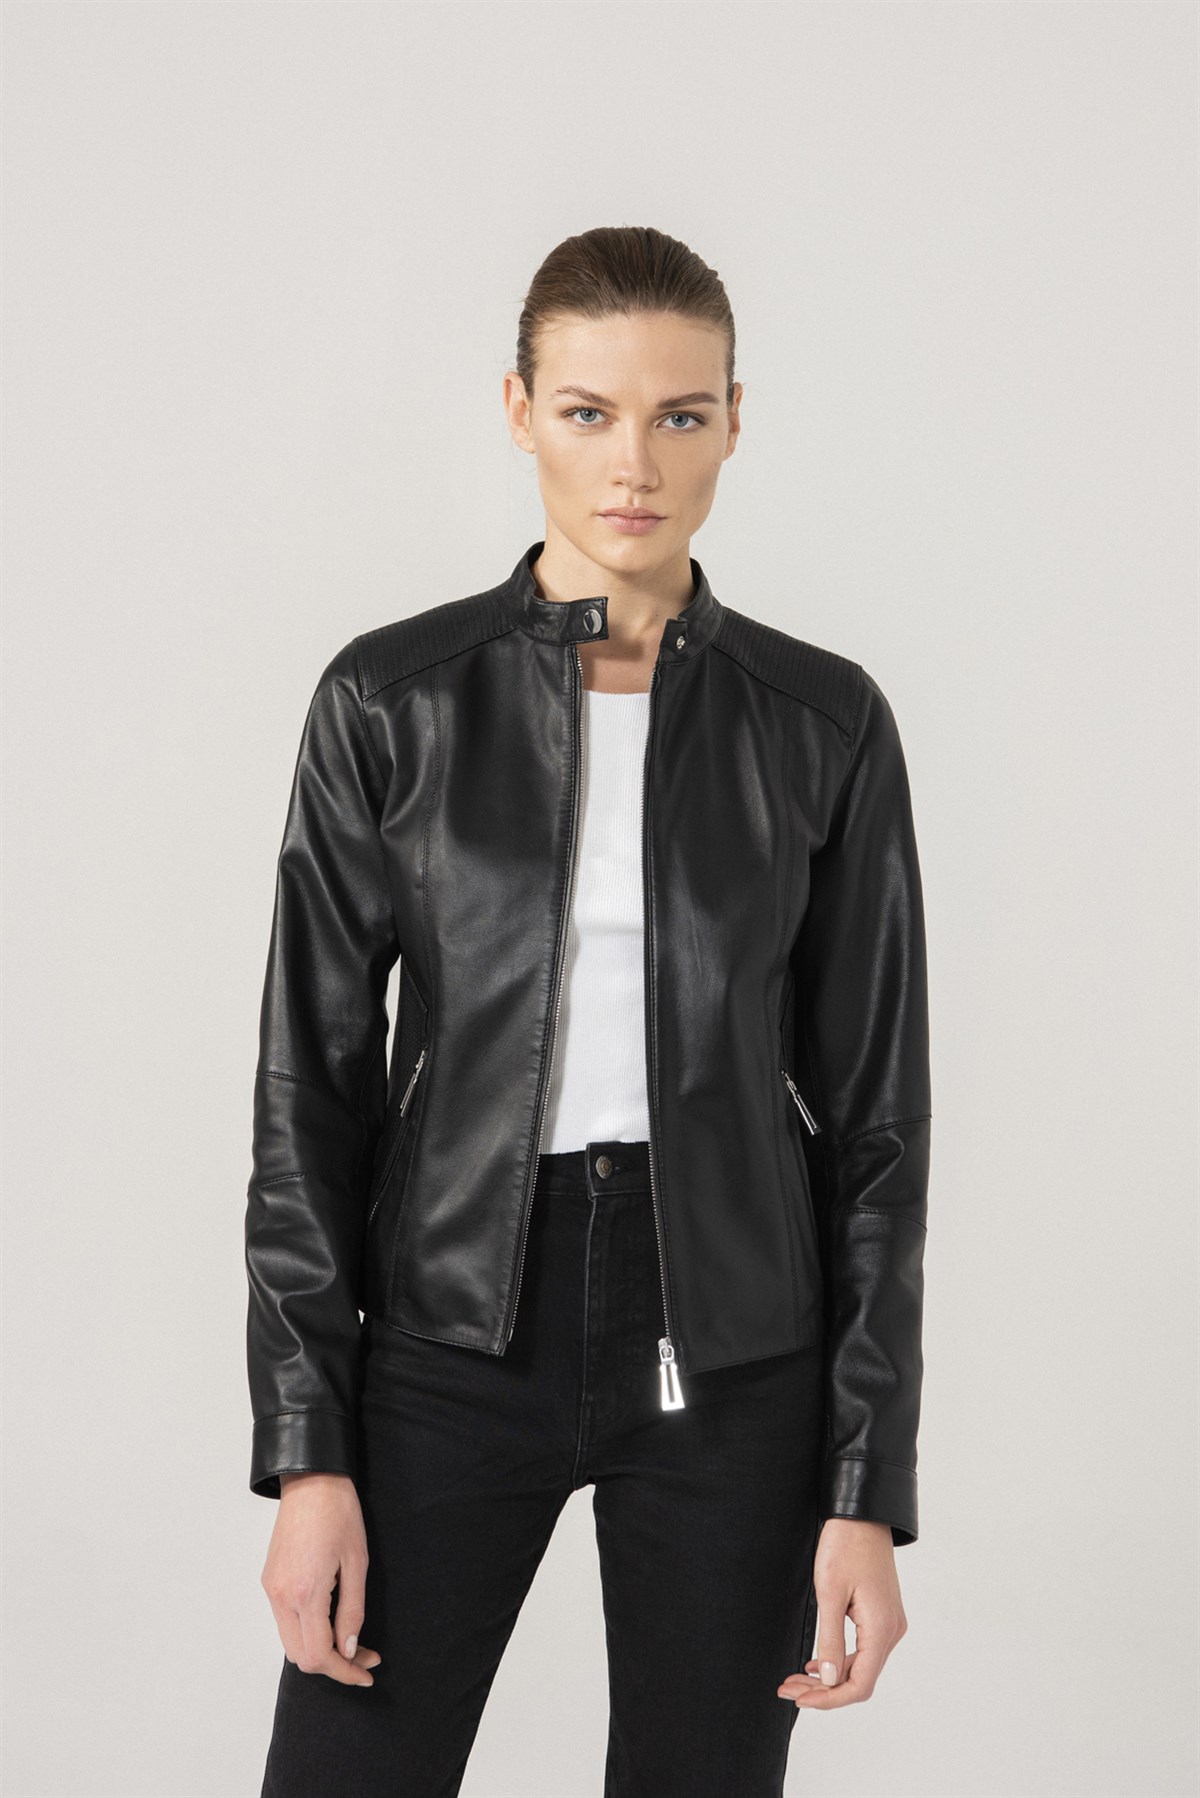 Black Leather Bomber Jacket Real Leather Jacket Best Gift For Her